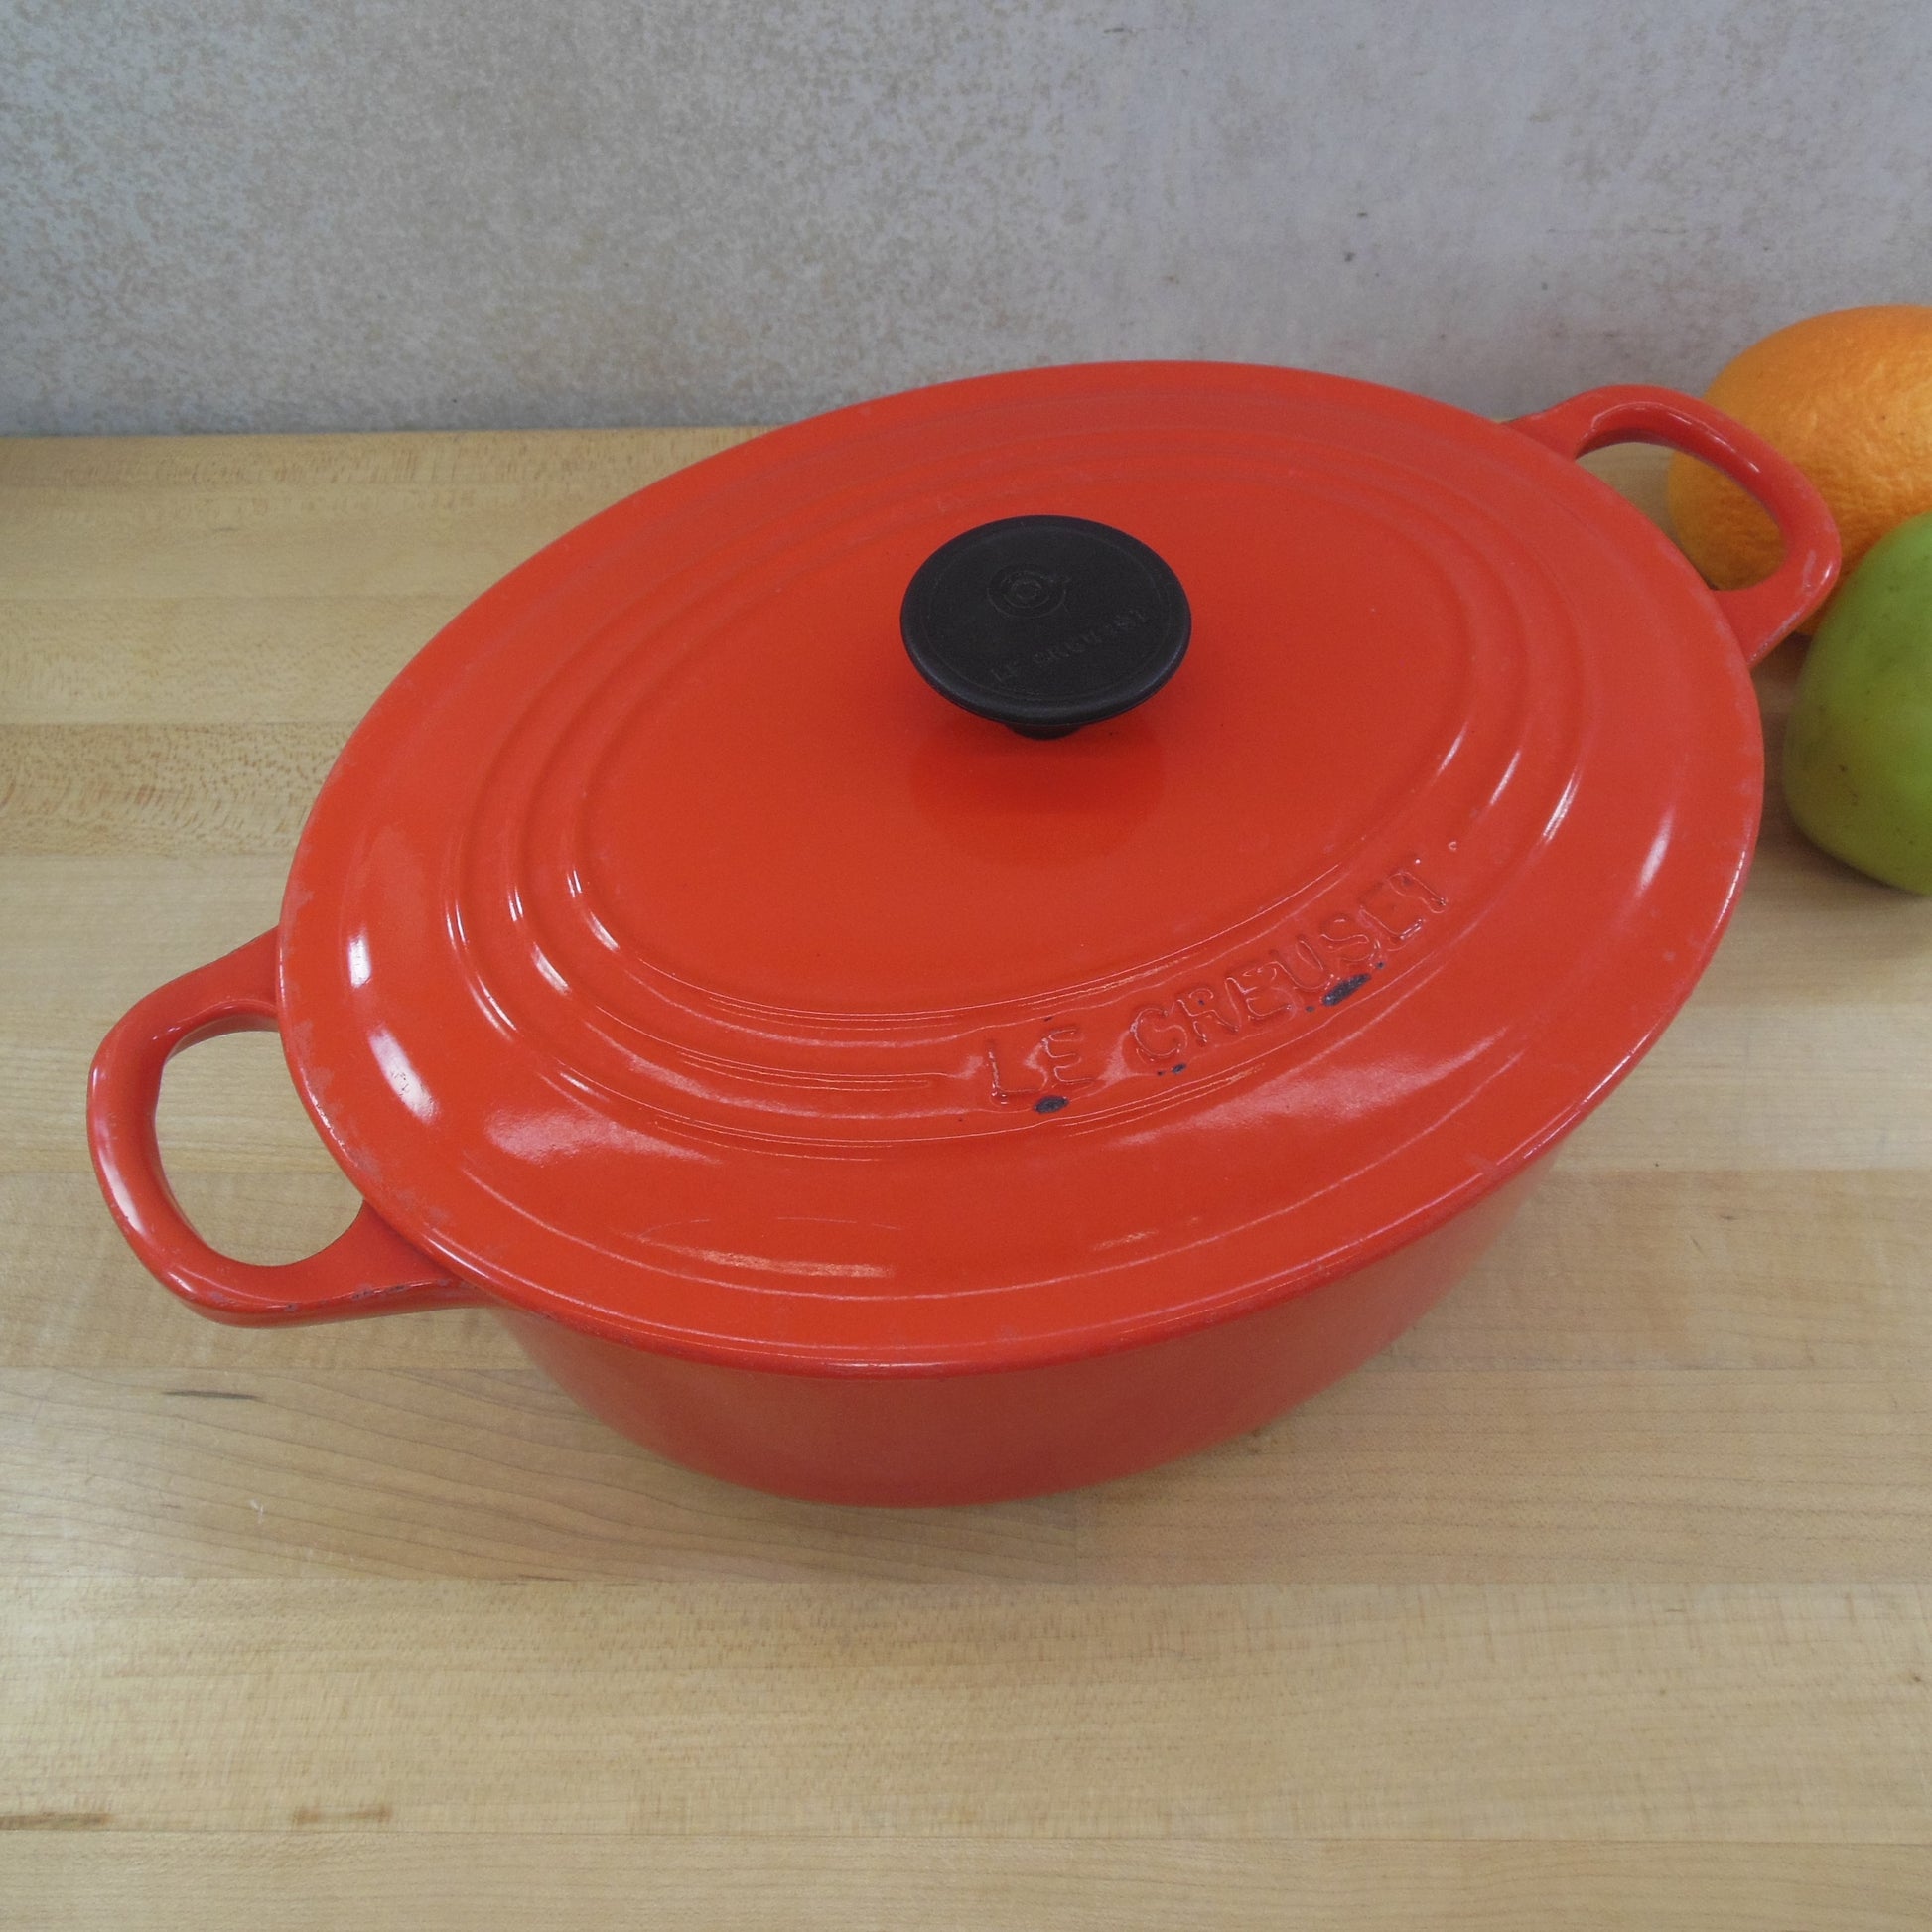 Segretto Cookware Enameled Oval Cast Iron Dutch Oven with Handle 7 Quart Rosso (Red) Oven Safe Dutch Oven Pot with Lid Cast Iron